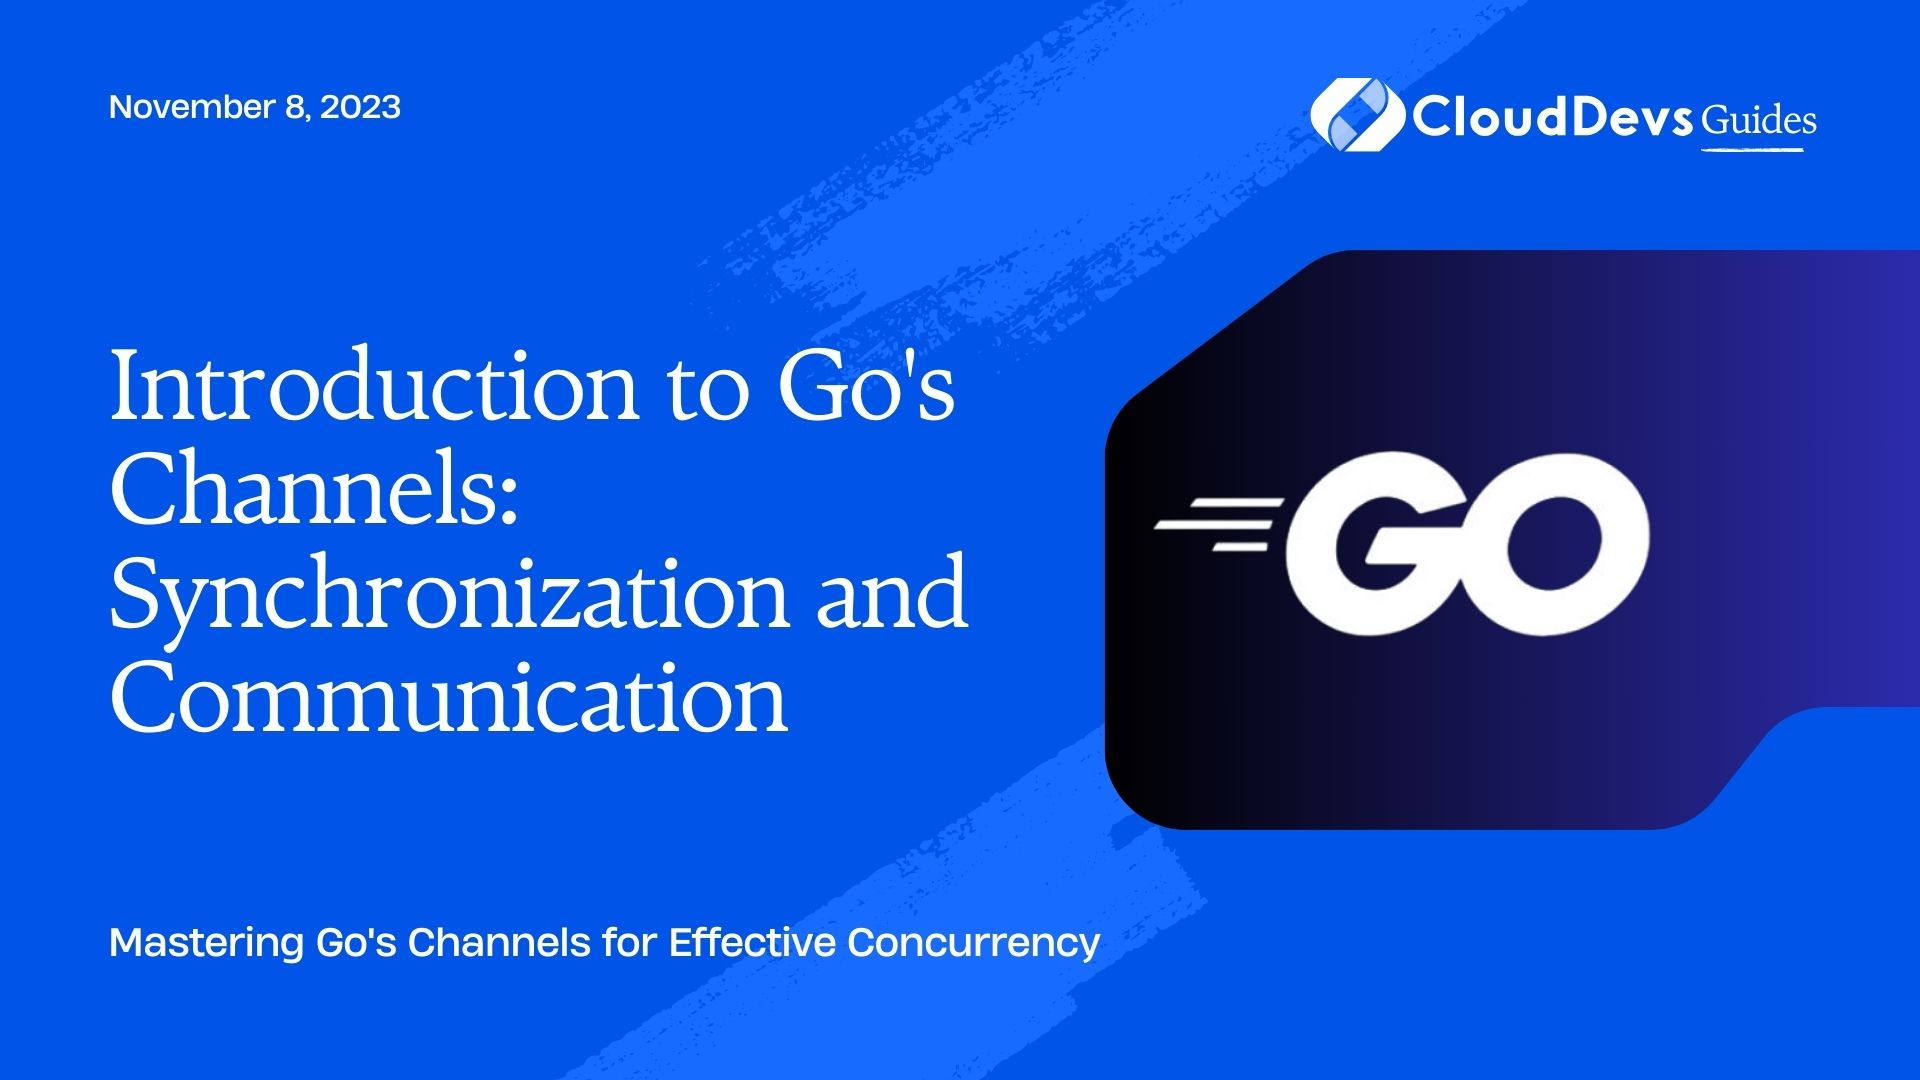 Introduction to Go's Channels: Synchronization and Communication